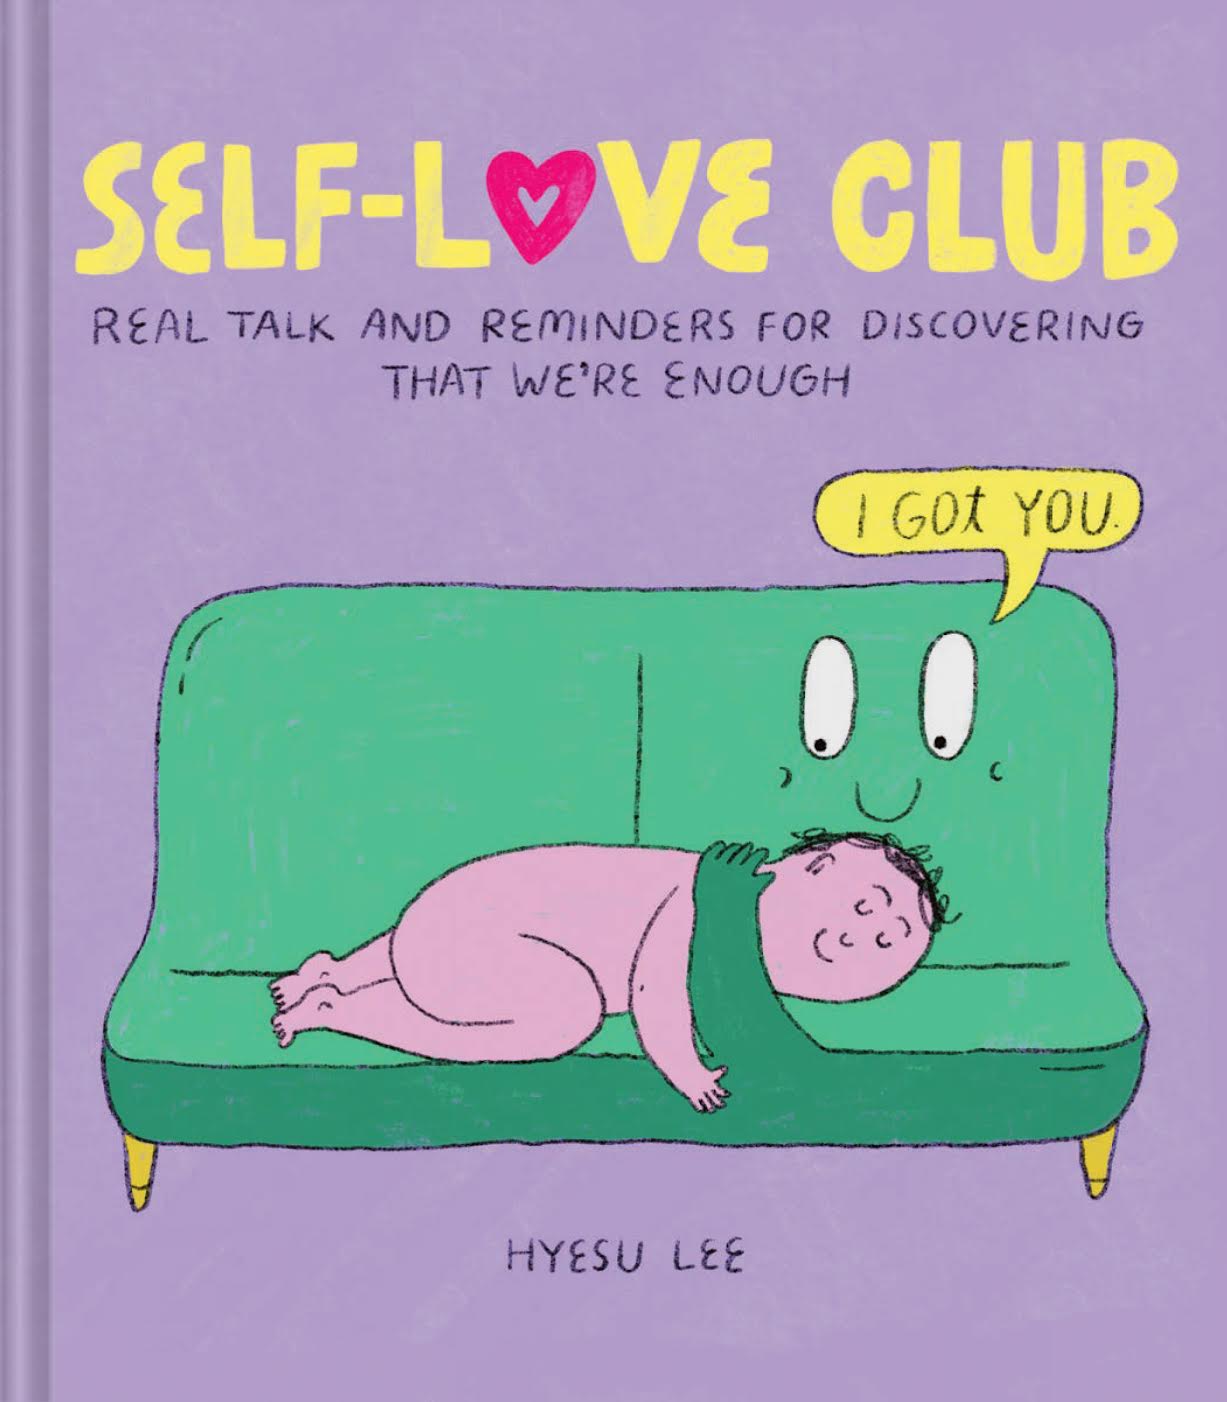 Book Launch: Self-Love Club by Hyesu Lee in conversation with Jeremy Nguyen